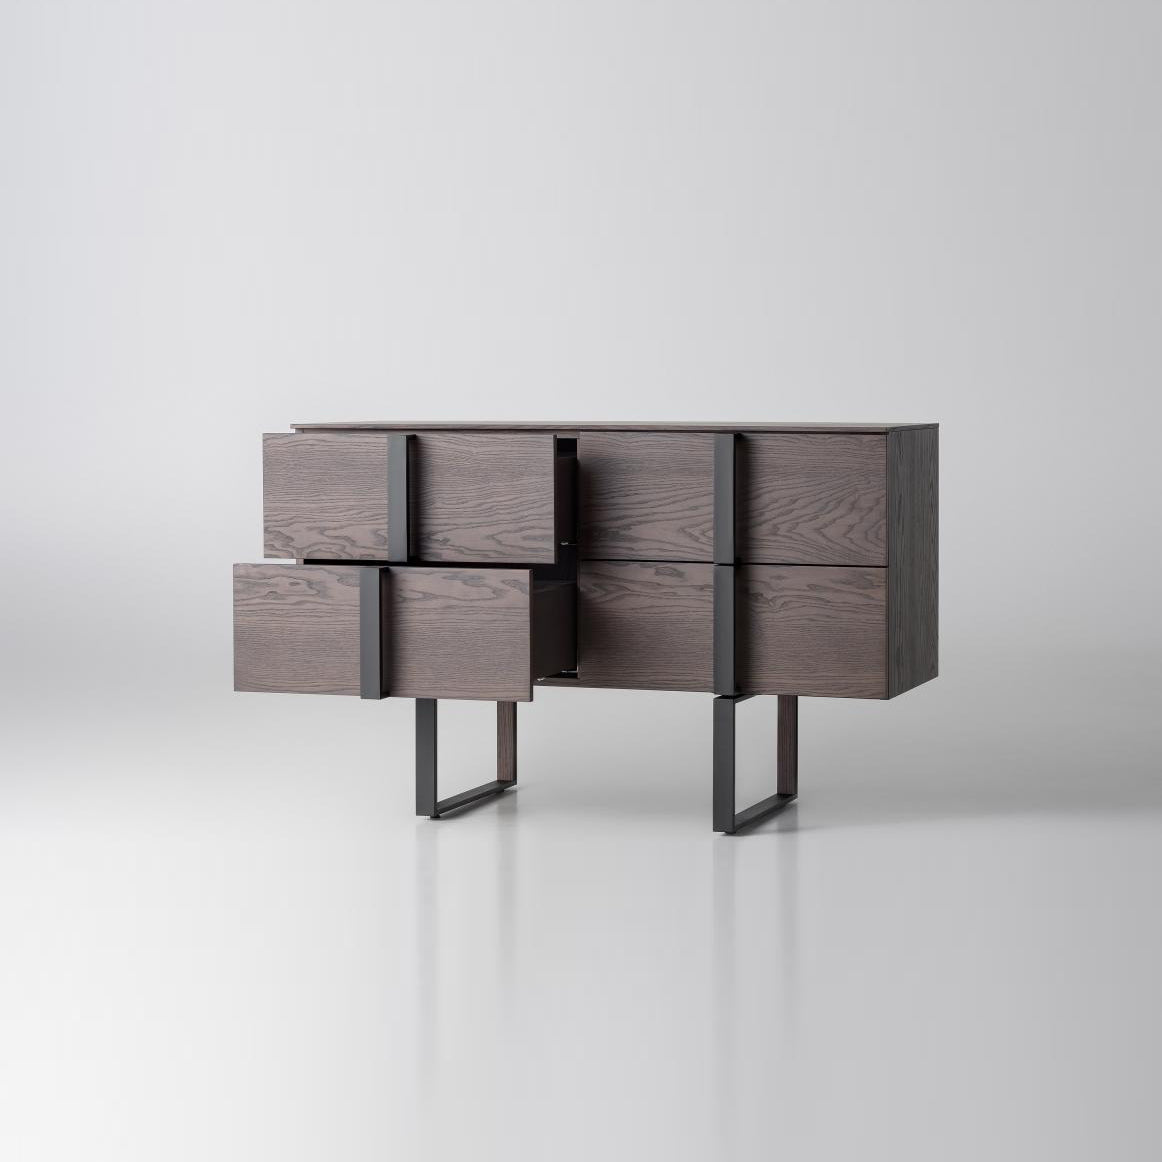 Chest Of Drawers GRID - UKRAINIAN PRODUCT DESIGN